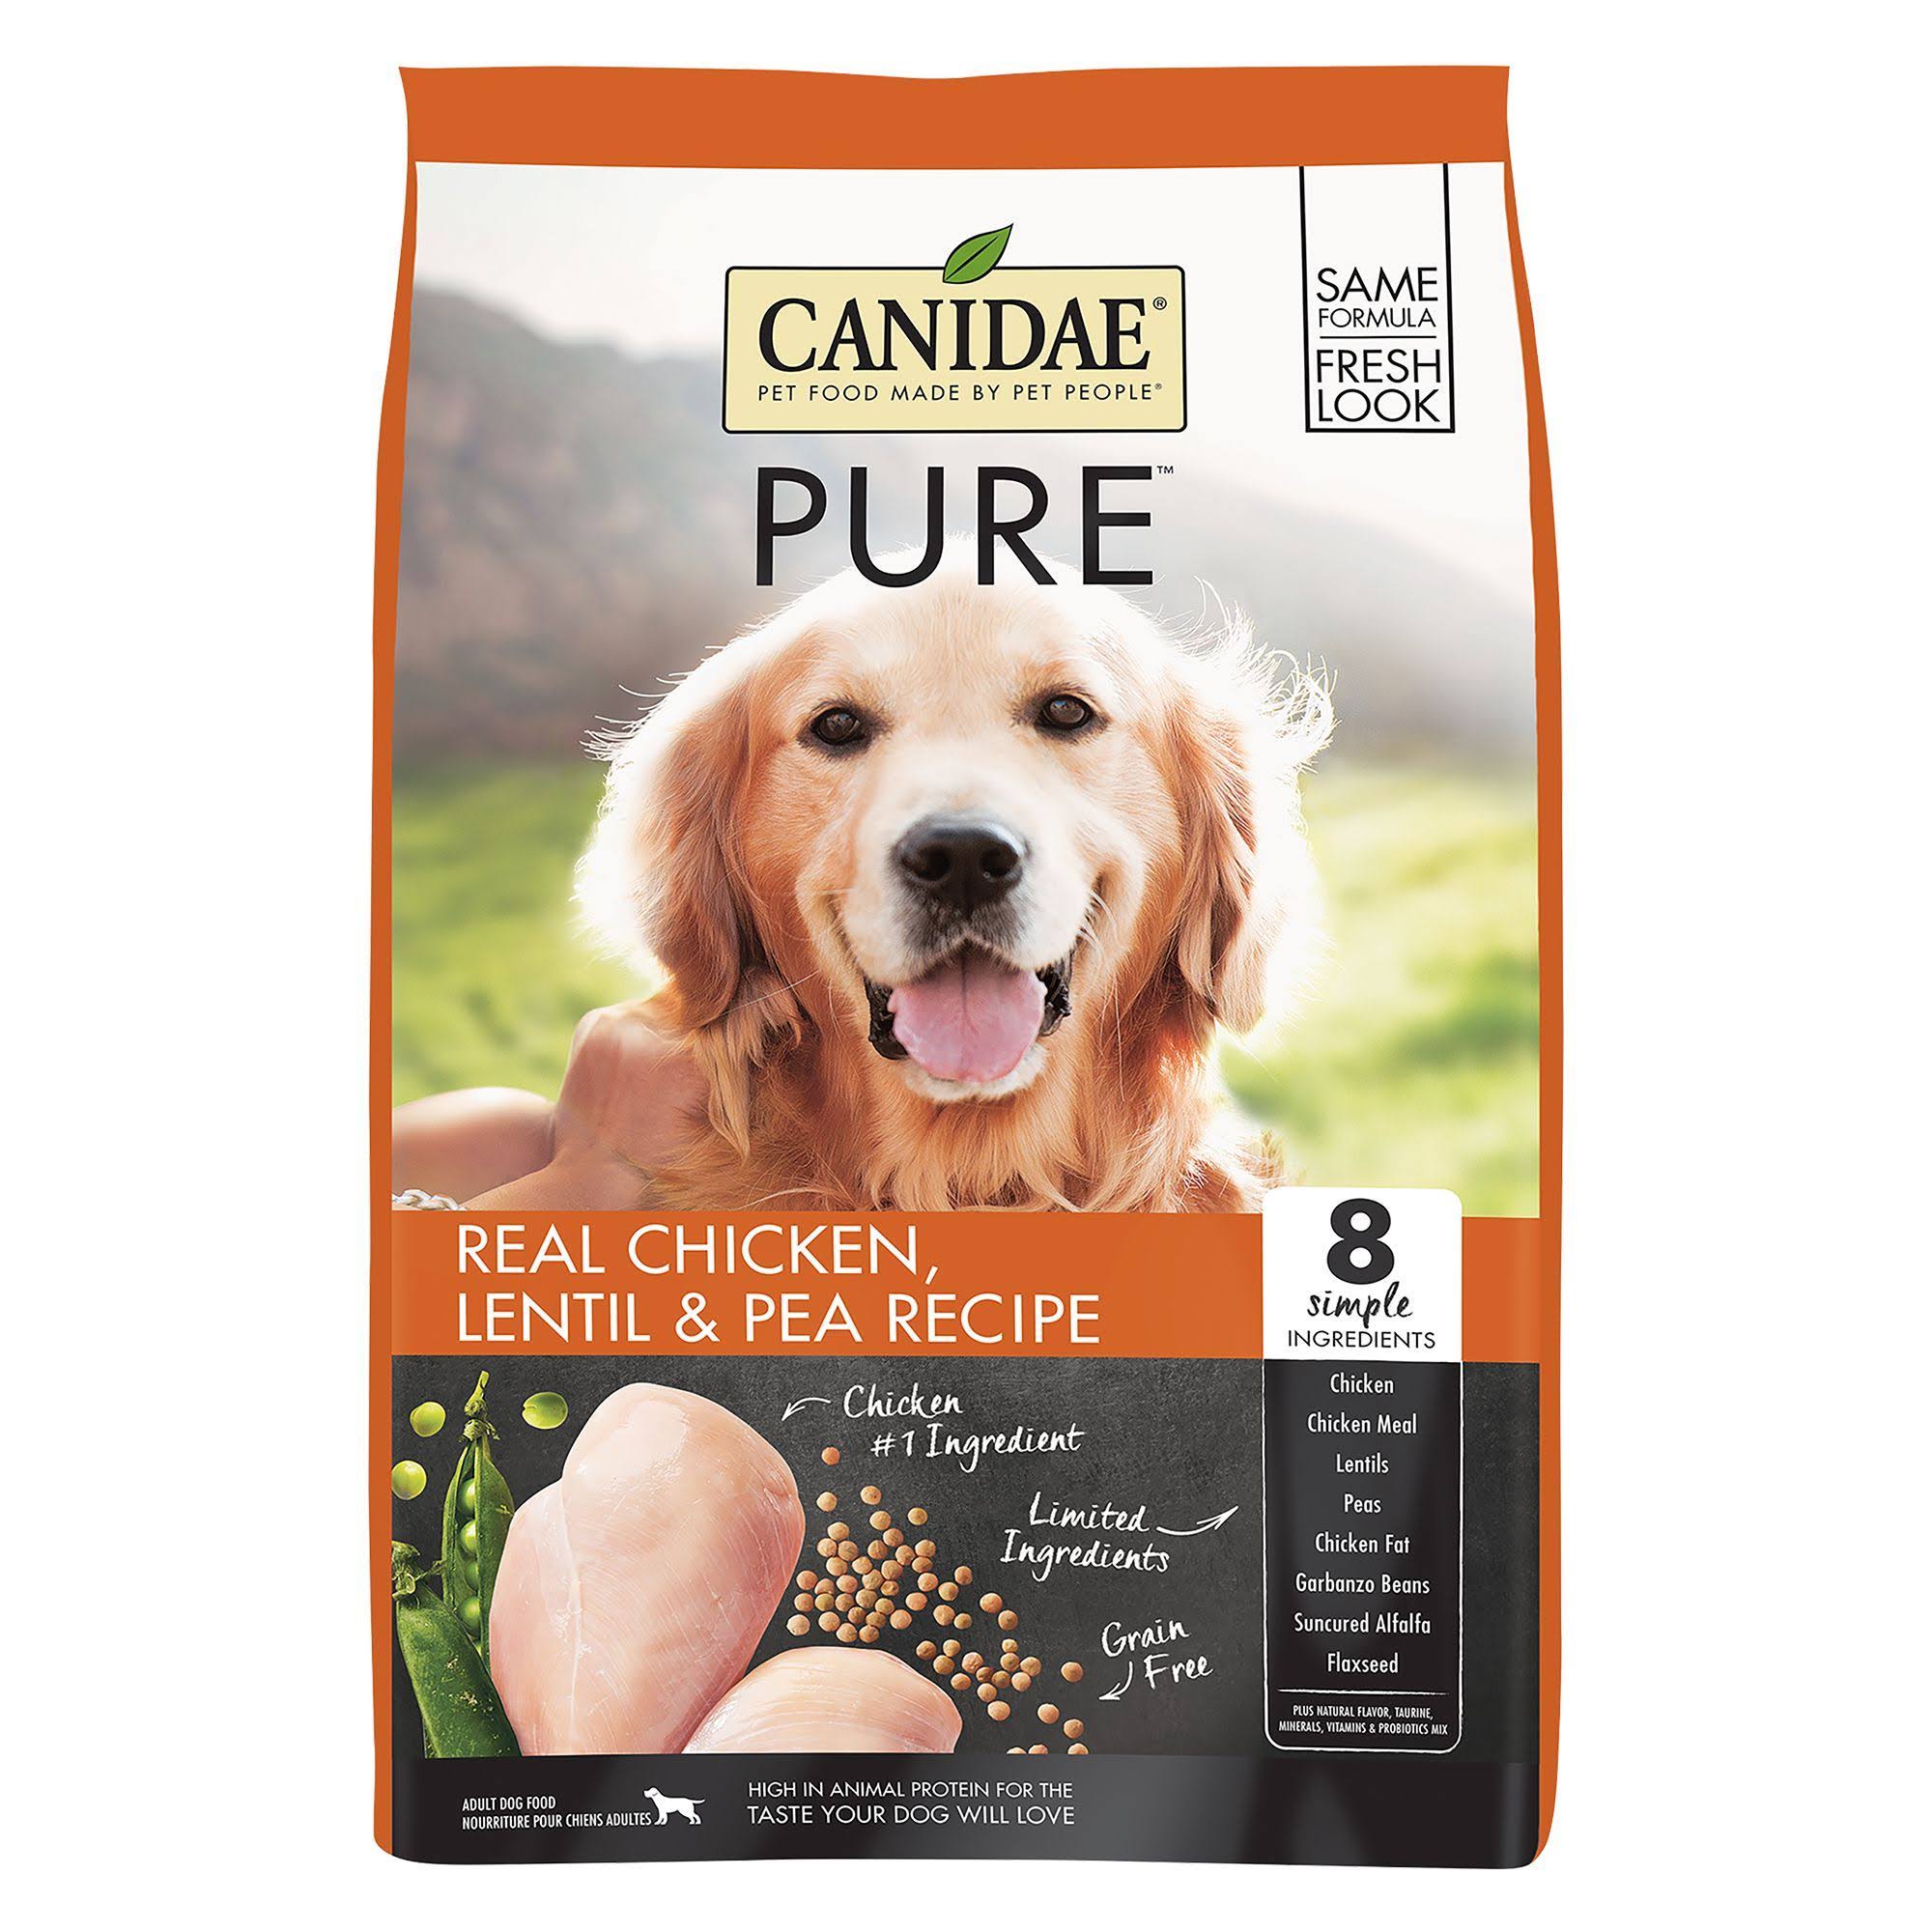 Canidae Grain Free Pure Chicken Lentil Pea Dry Dog Food, 24 lb